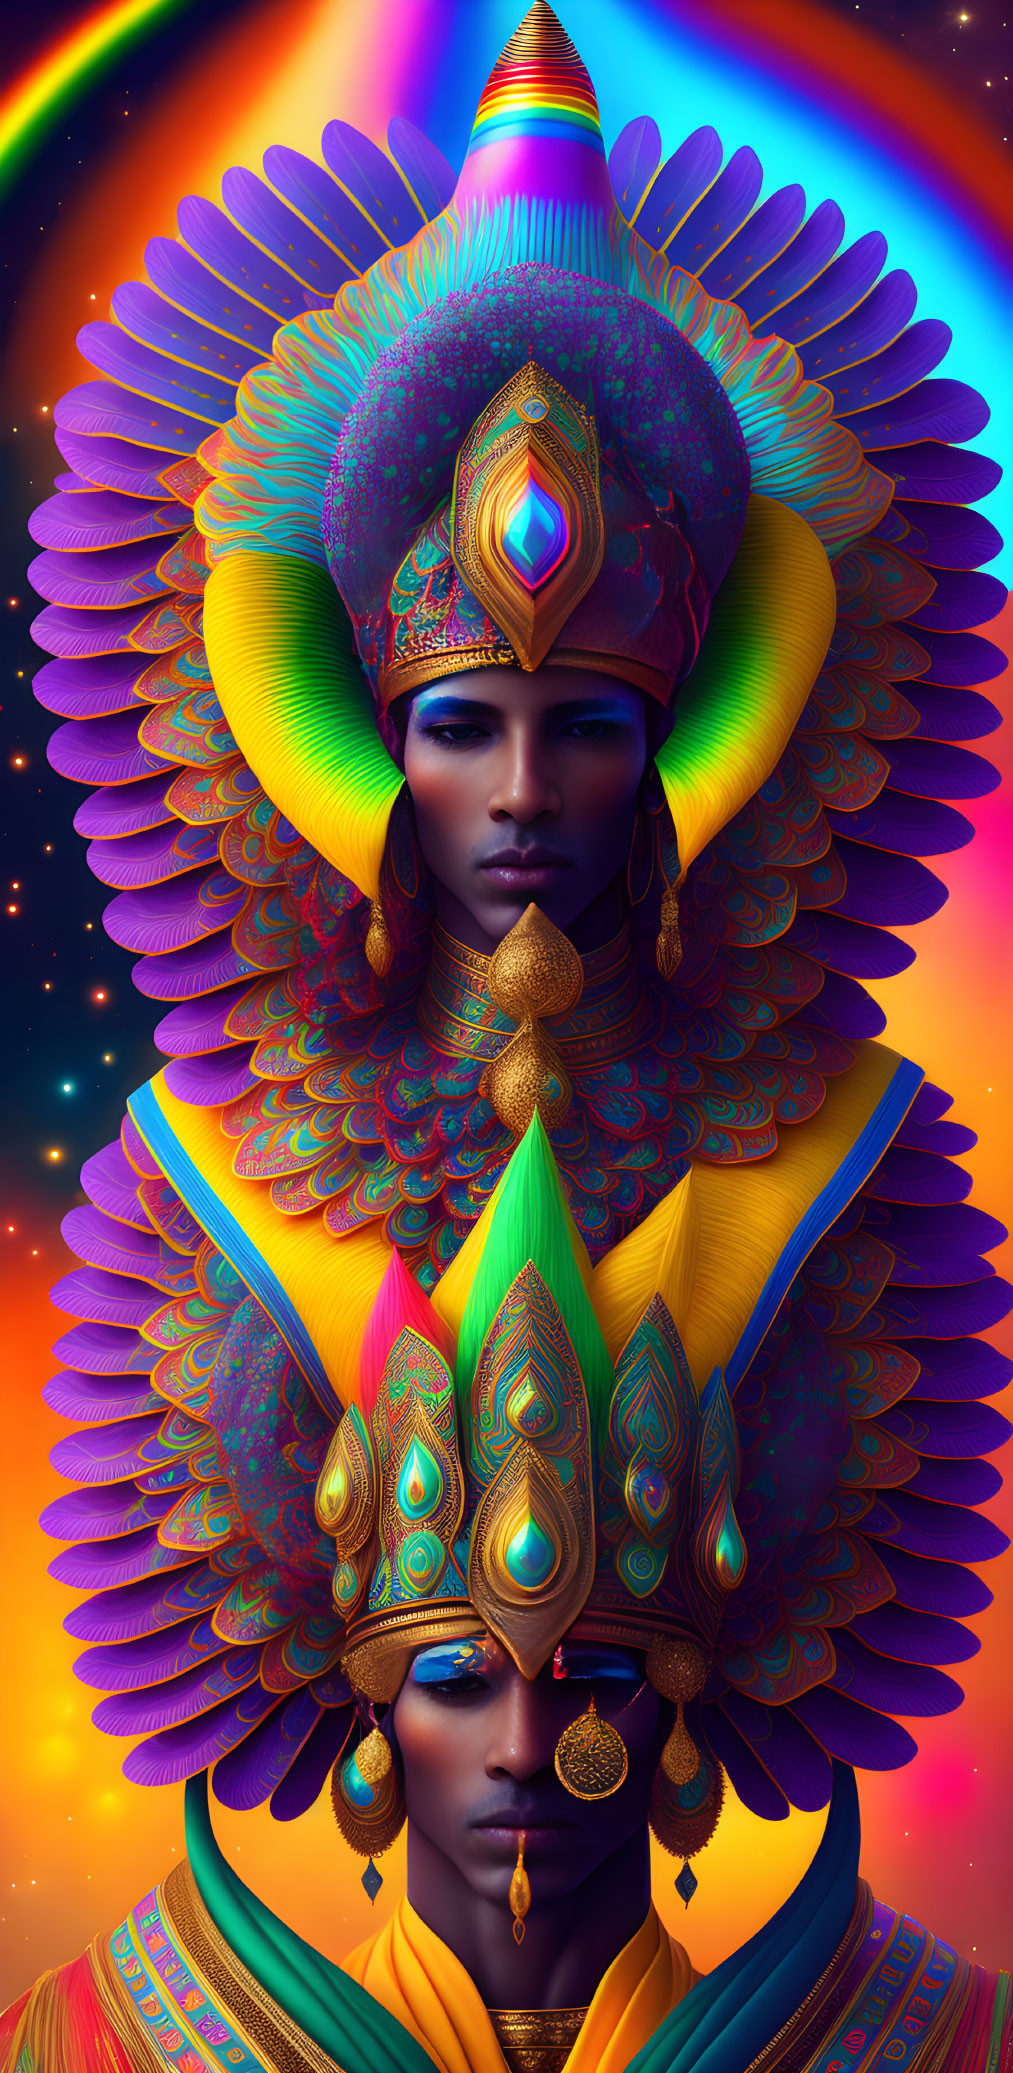 Colorful digital portrait of a person with peacock feather-like headdress on cosmic backdrop.